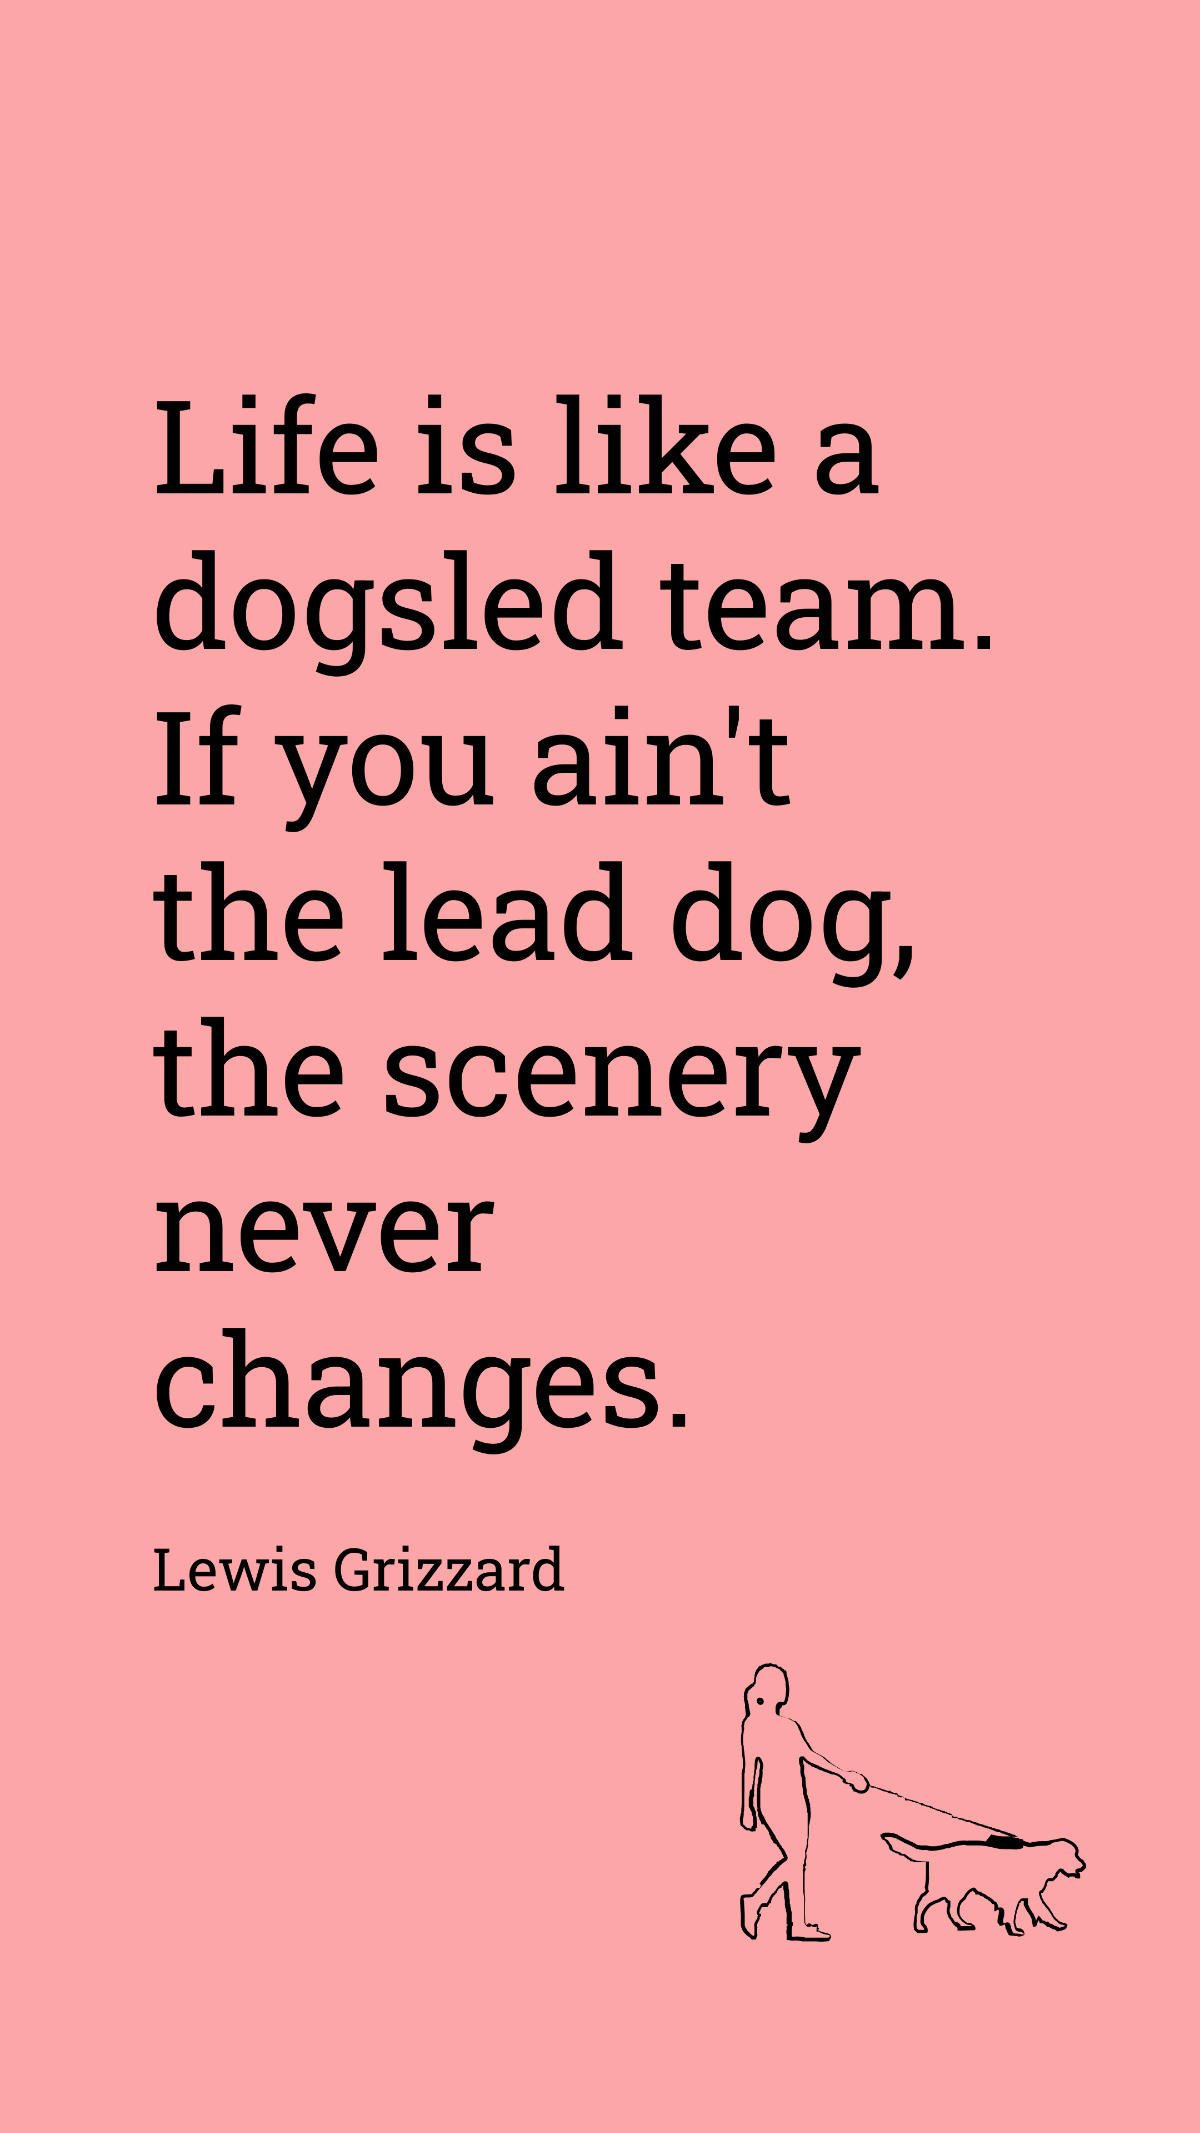 Lewis Grizzard - Life is like a dogsled team. If you ain't the lead dog, the scenery never changes. Template